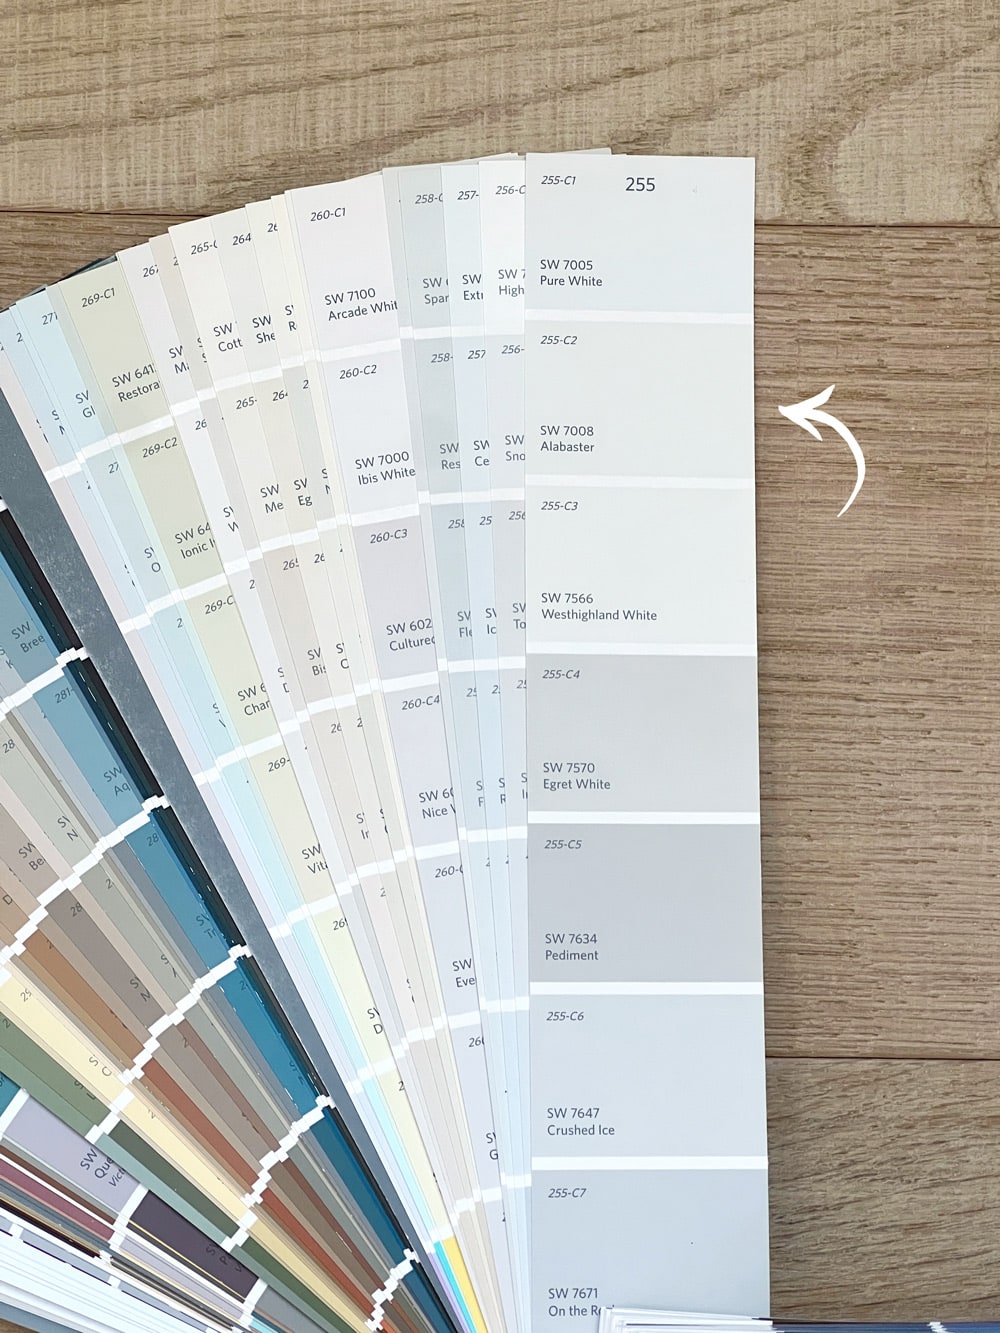 The 10 Best White Paint Colors (as chosen by designers) - Jenna Sue Design